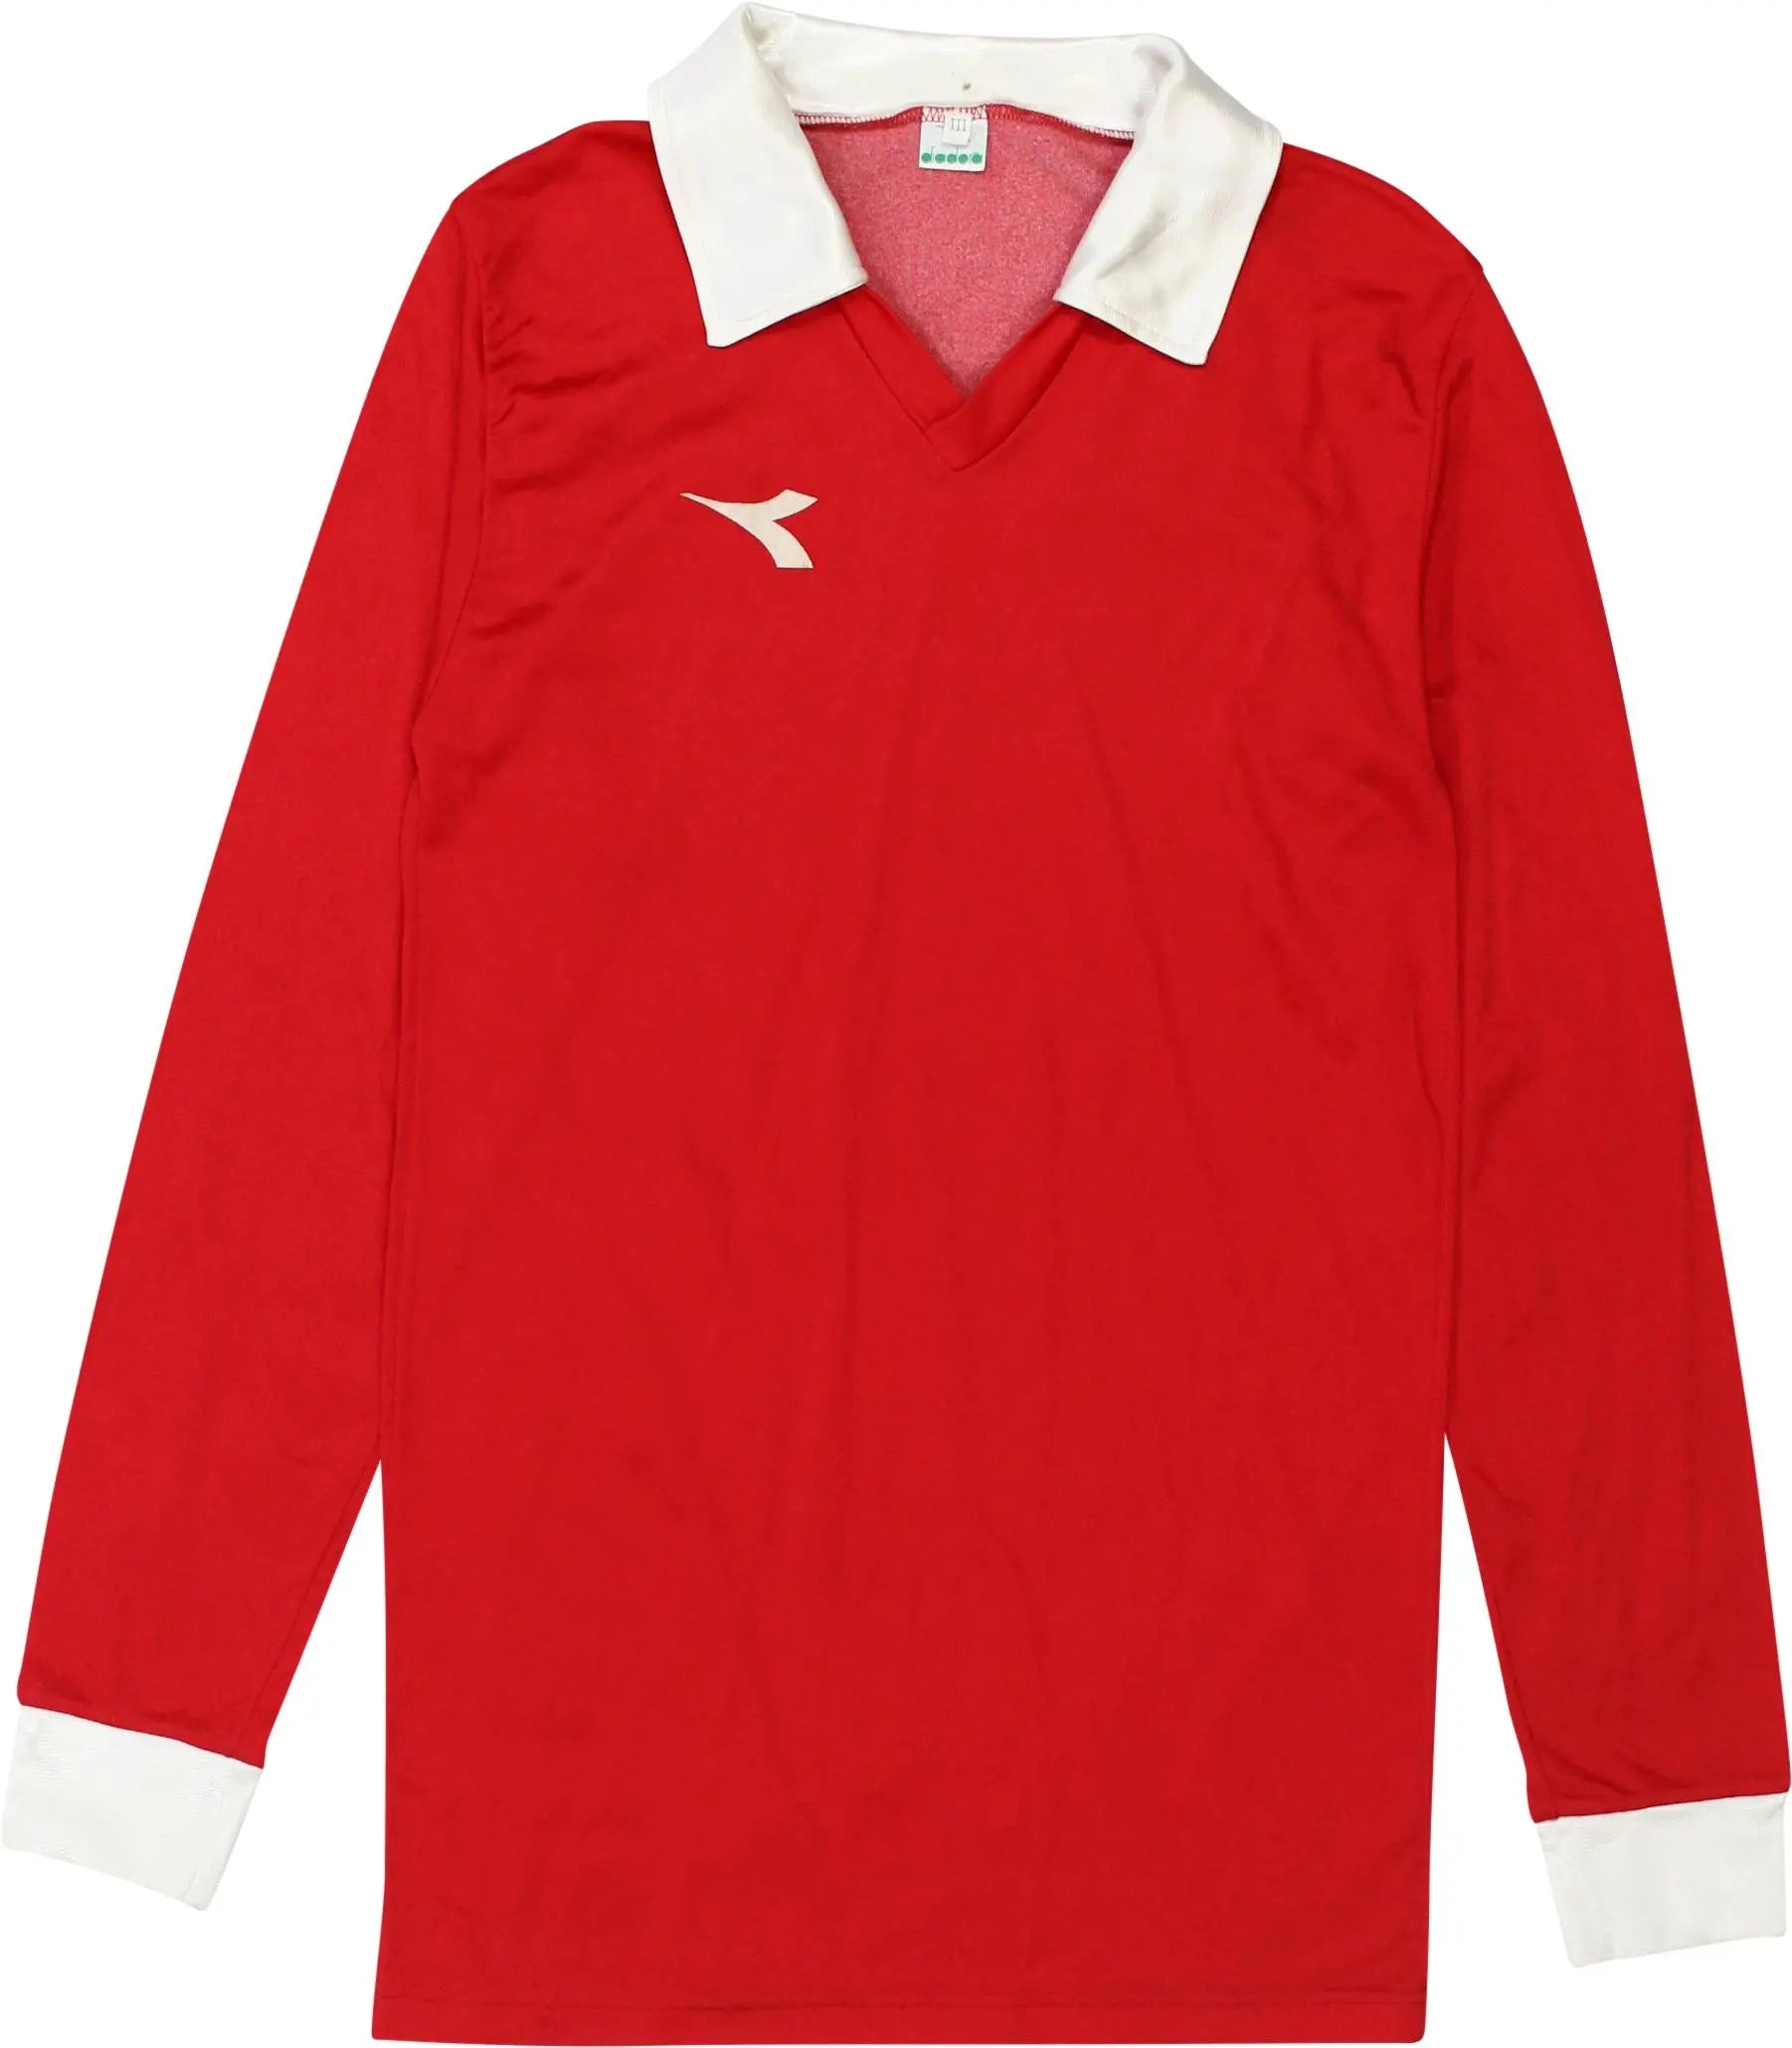 Diadora - 80s Red Long Sleeve Football Shirt by Diadora- ThriftTale.com - Vintage and second handclothing